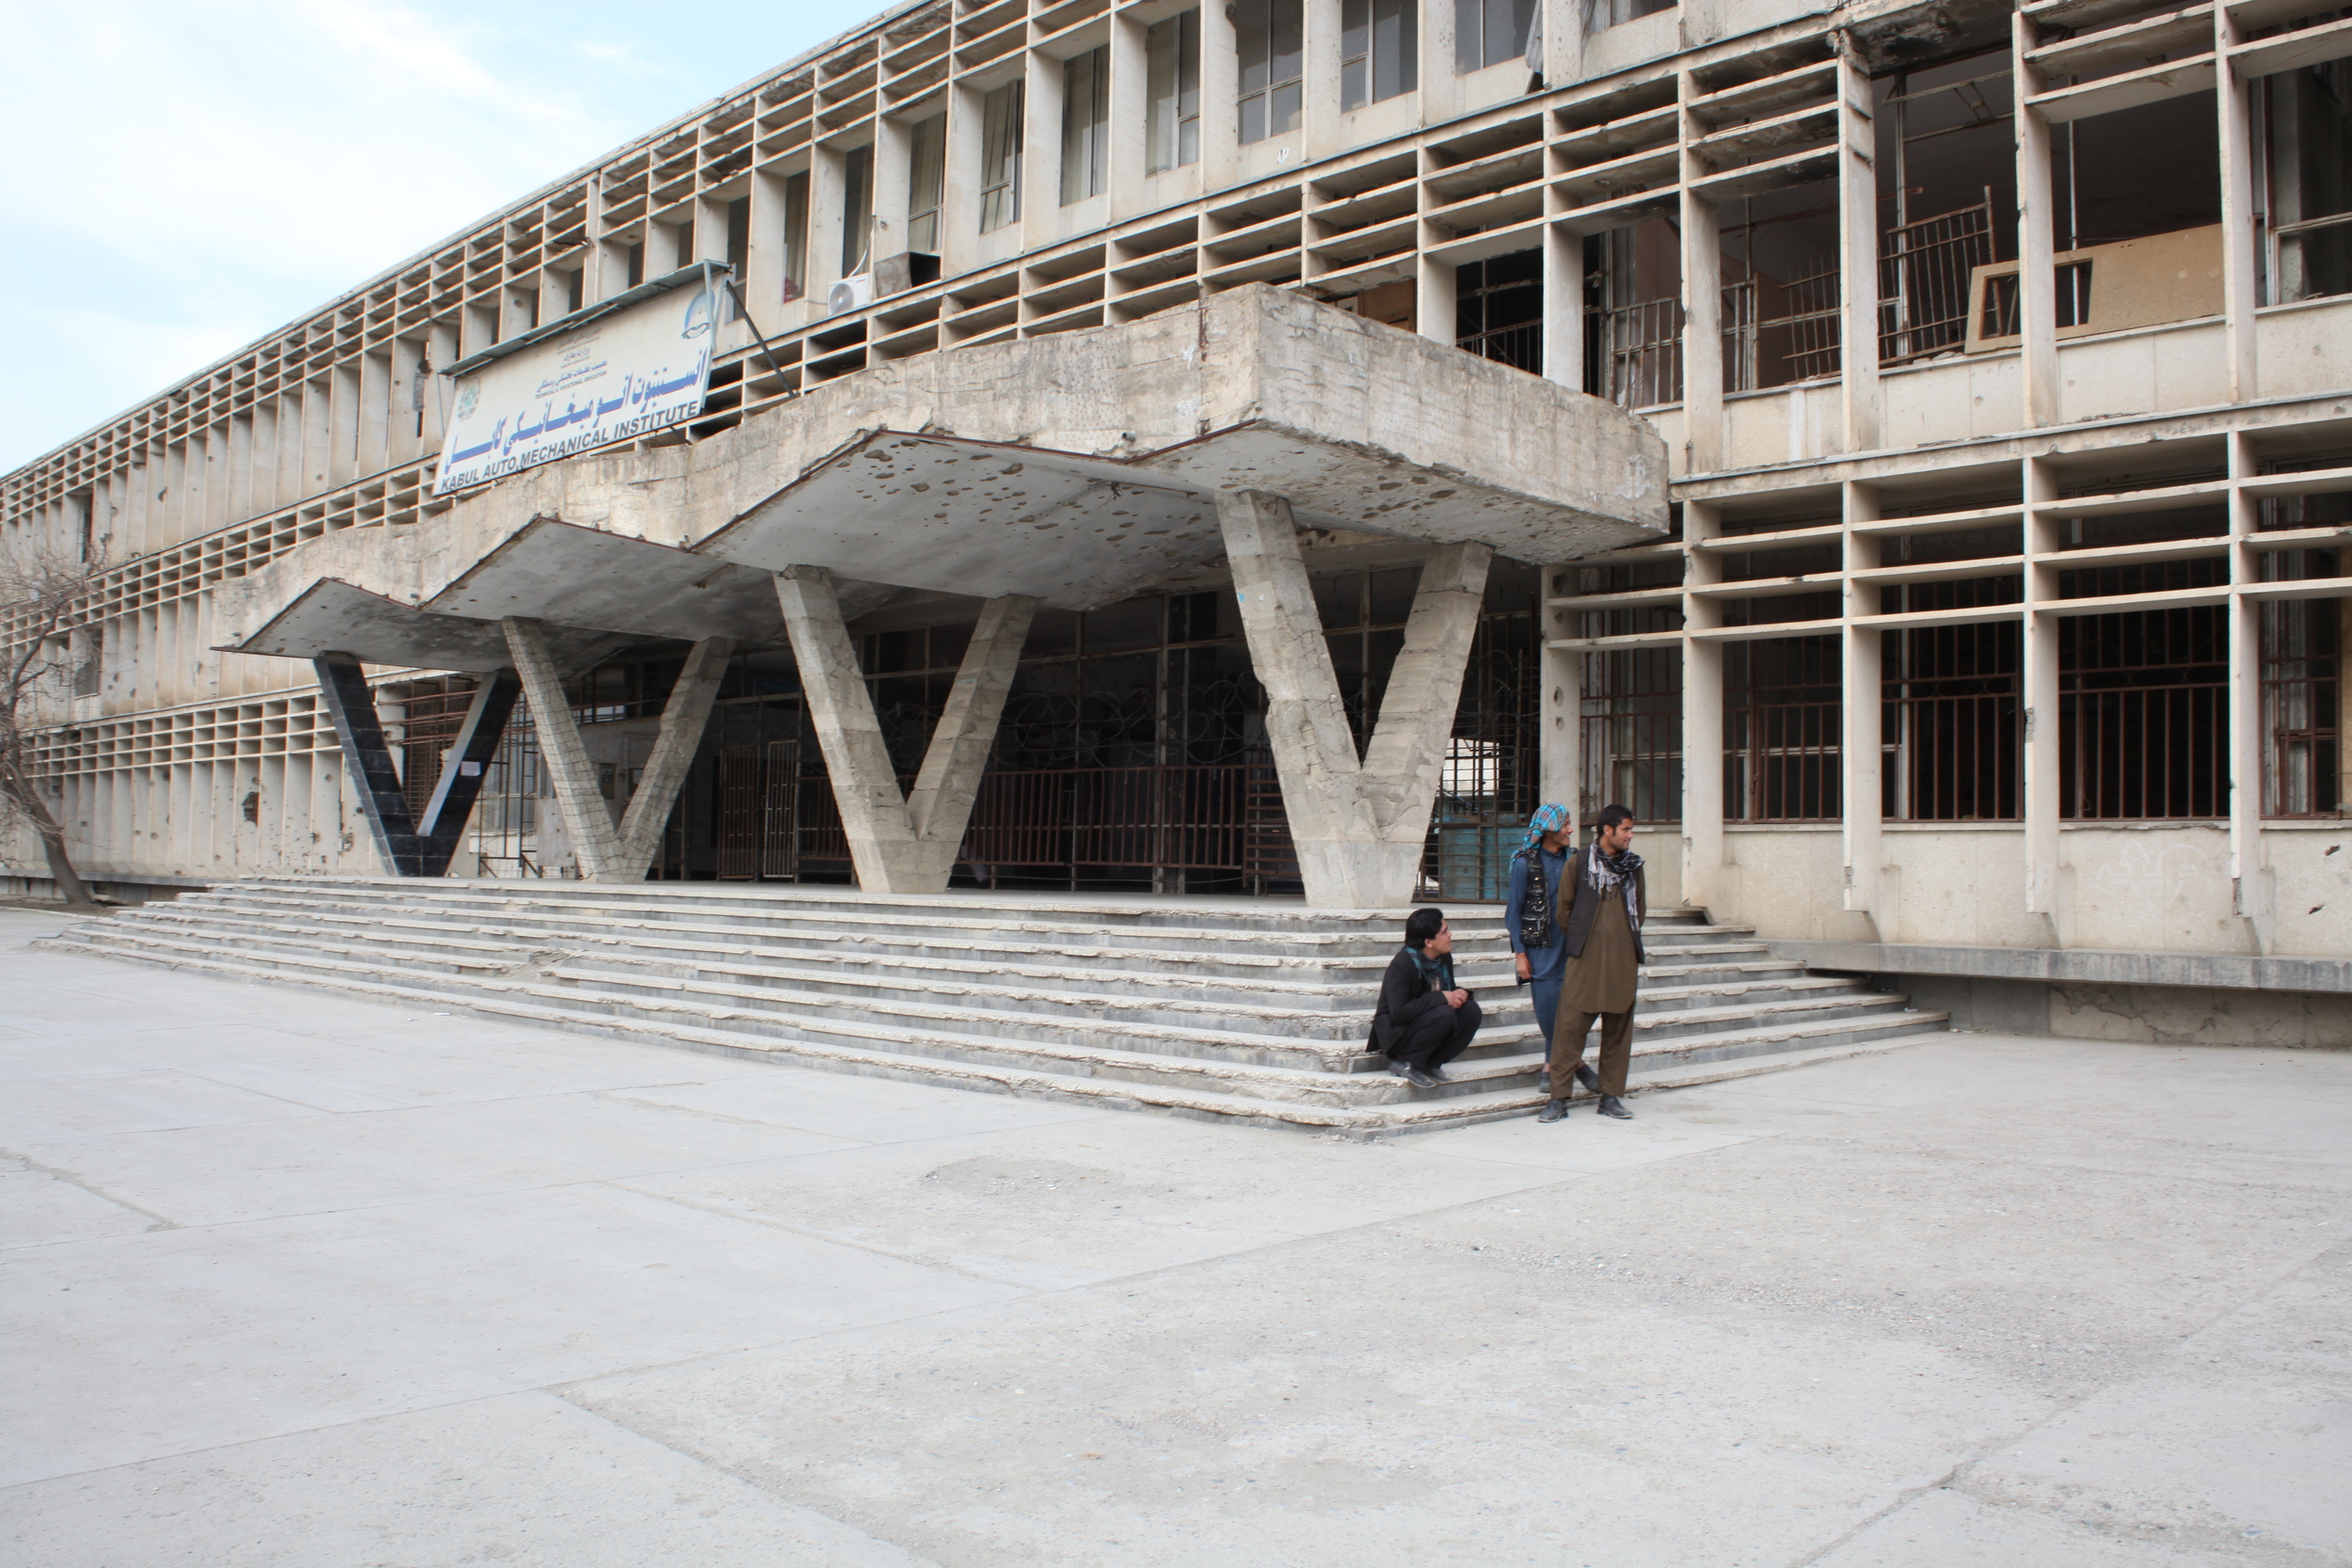   Another Soviet infrastructural project, the Polytechnic University in Kabul is still holding classes despite the fact that its campus was badly damaged when the Taliban took the city. Inside these walls students learn about welding, car repair, and